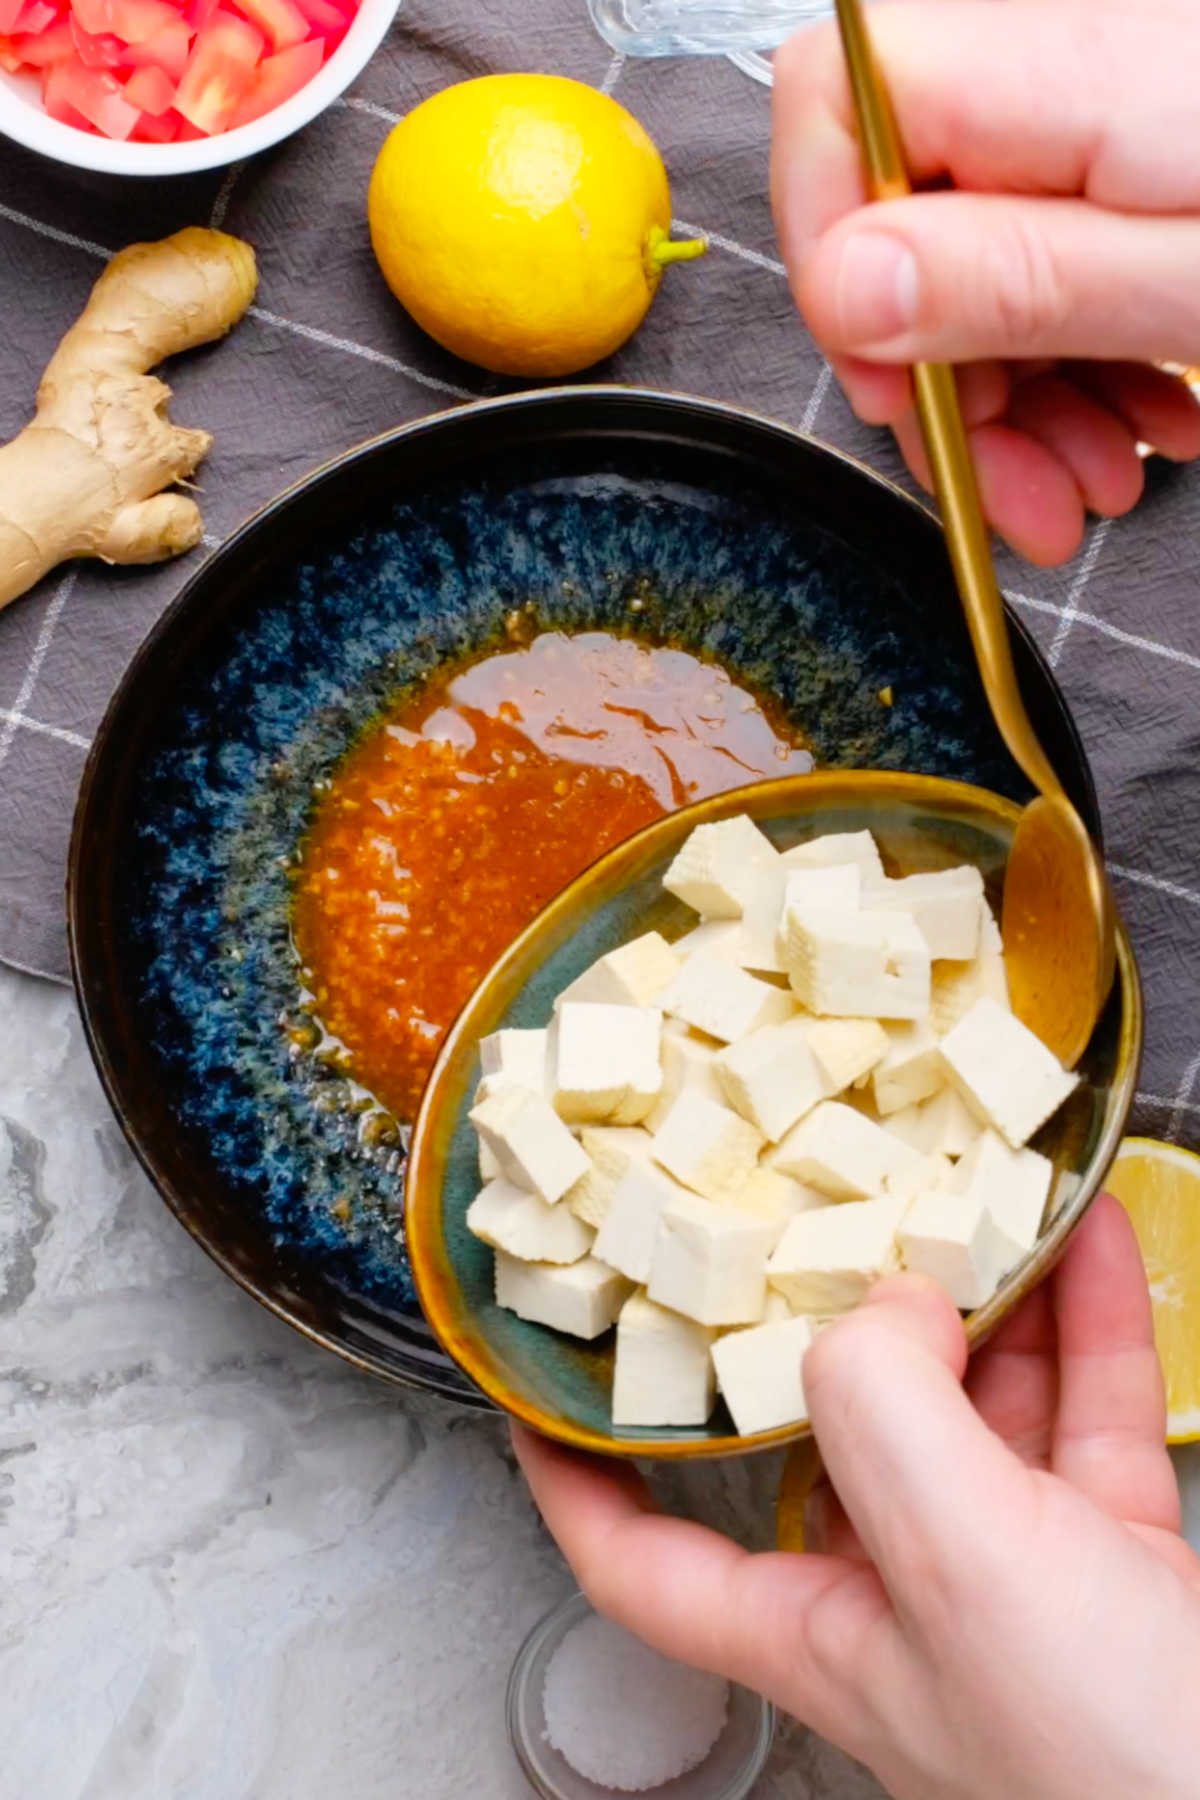 Cubed tofu being added to a bowl of marinade.